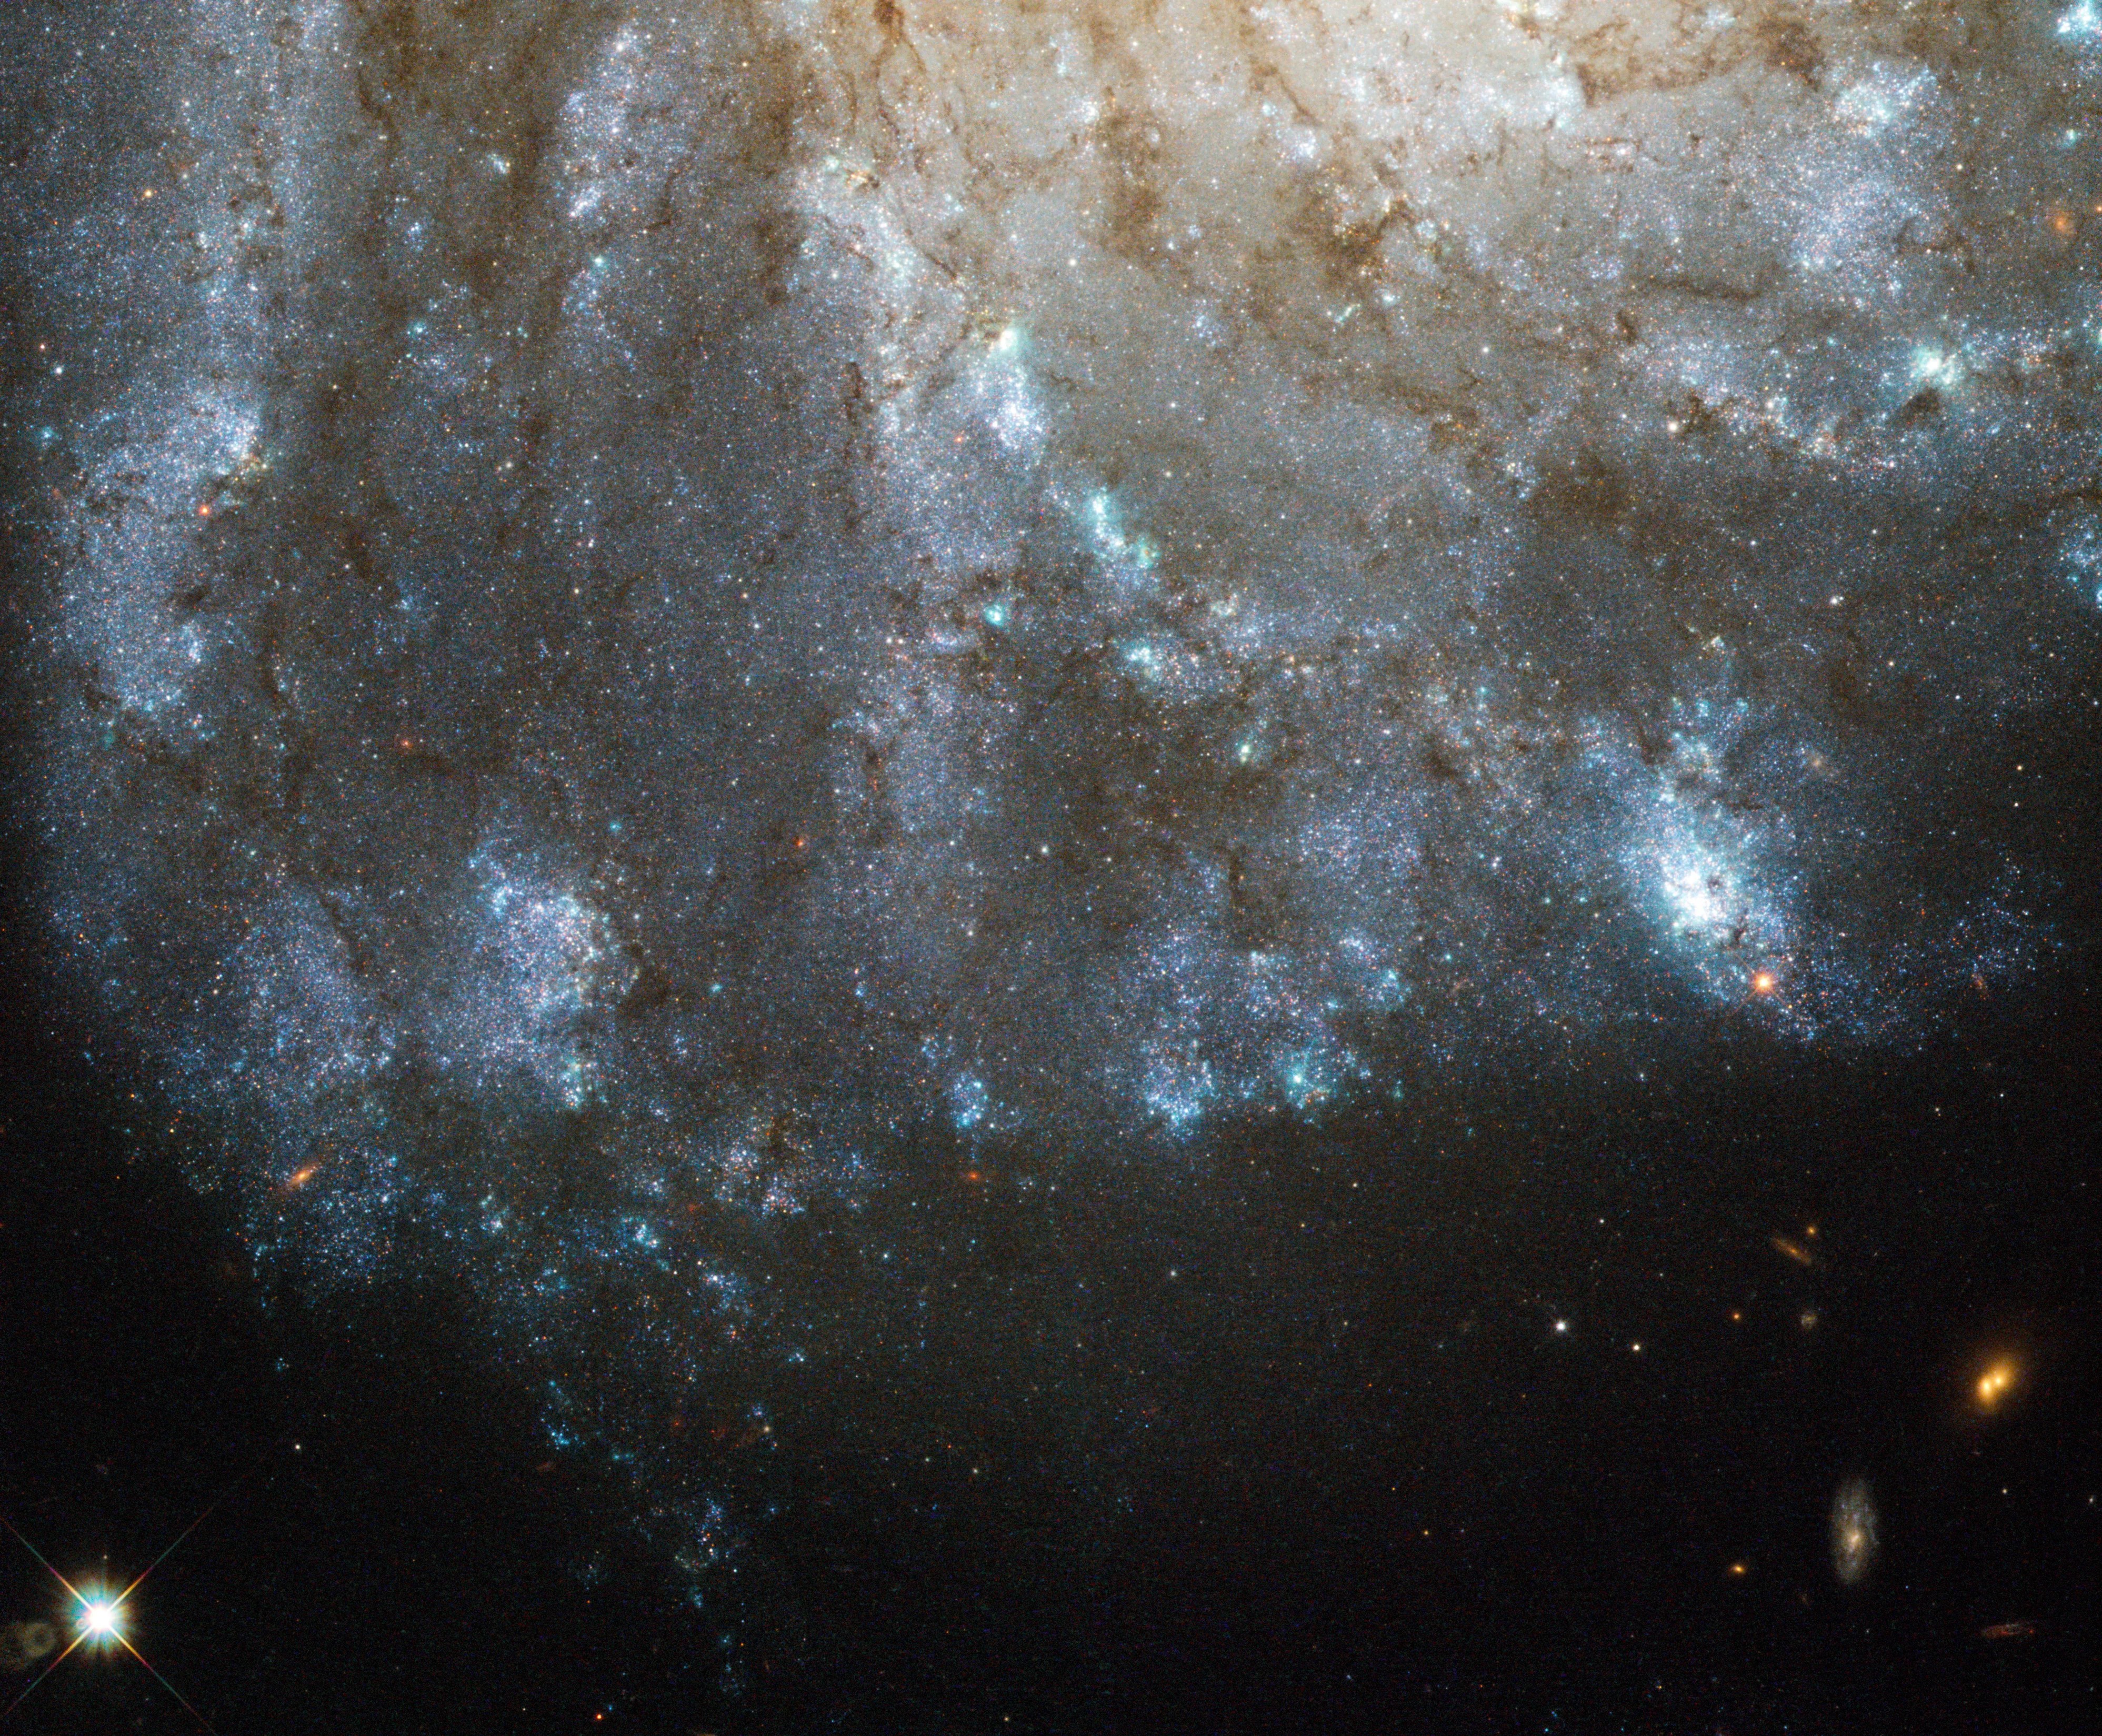 The bright blue spiraling arms of a galaxy are seen against black space, with a yellowish core visible near the top of the image.